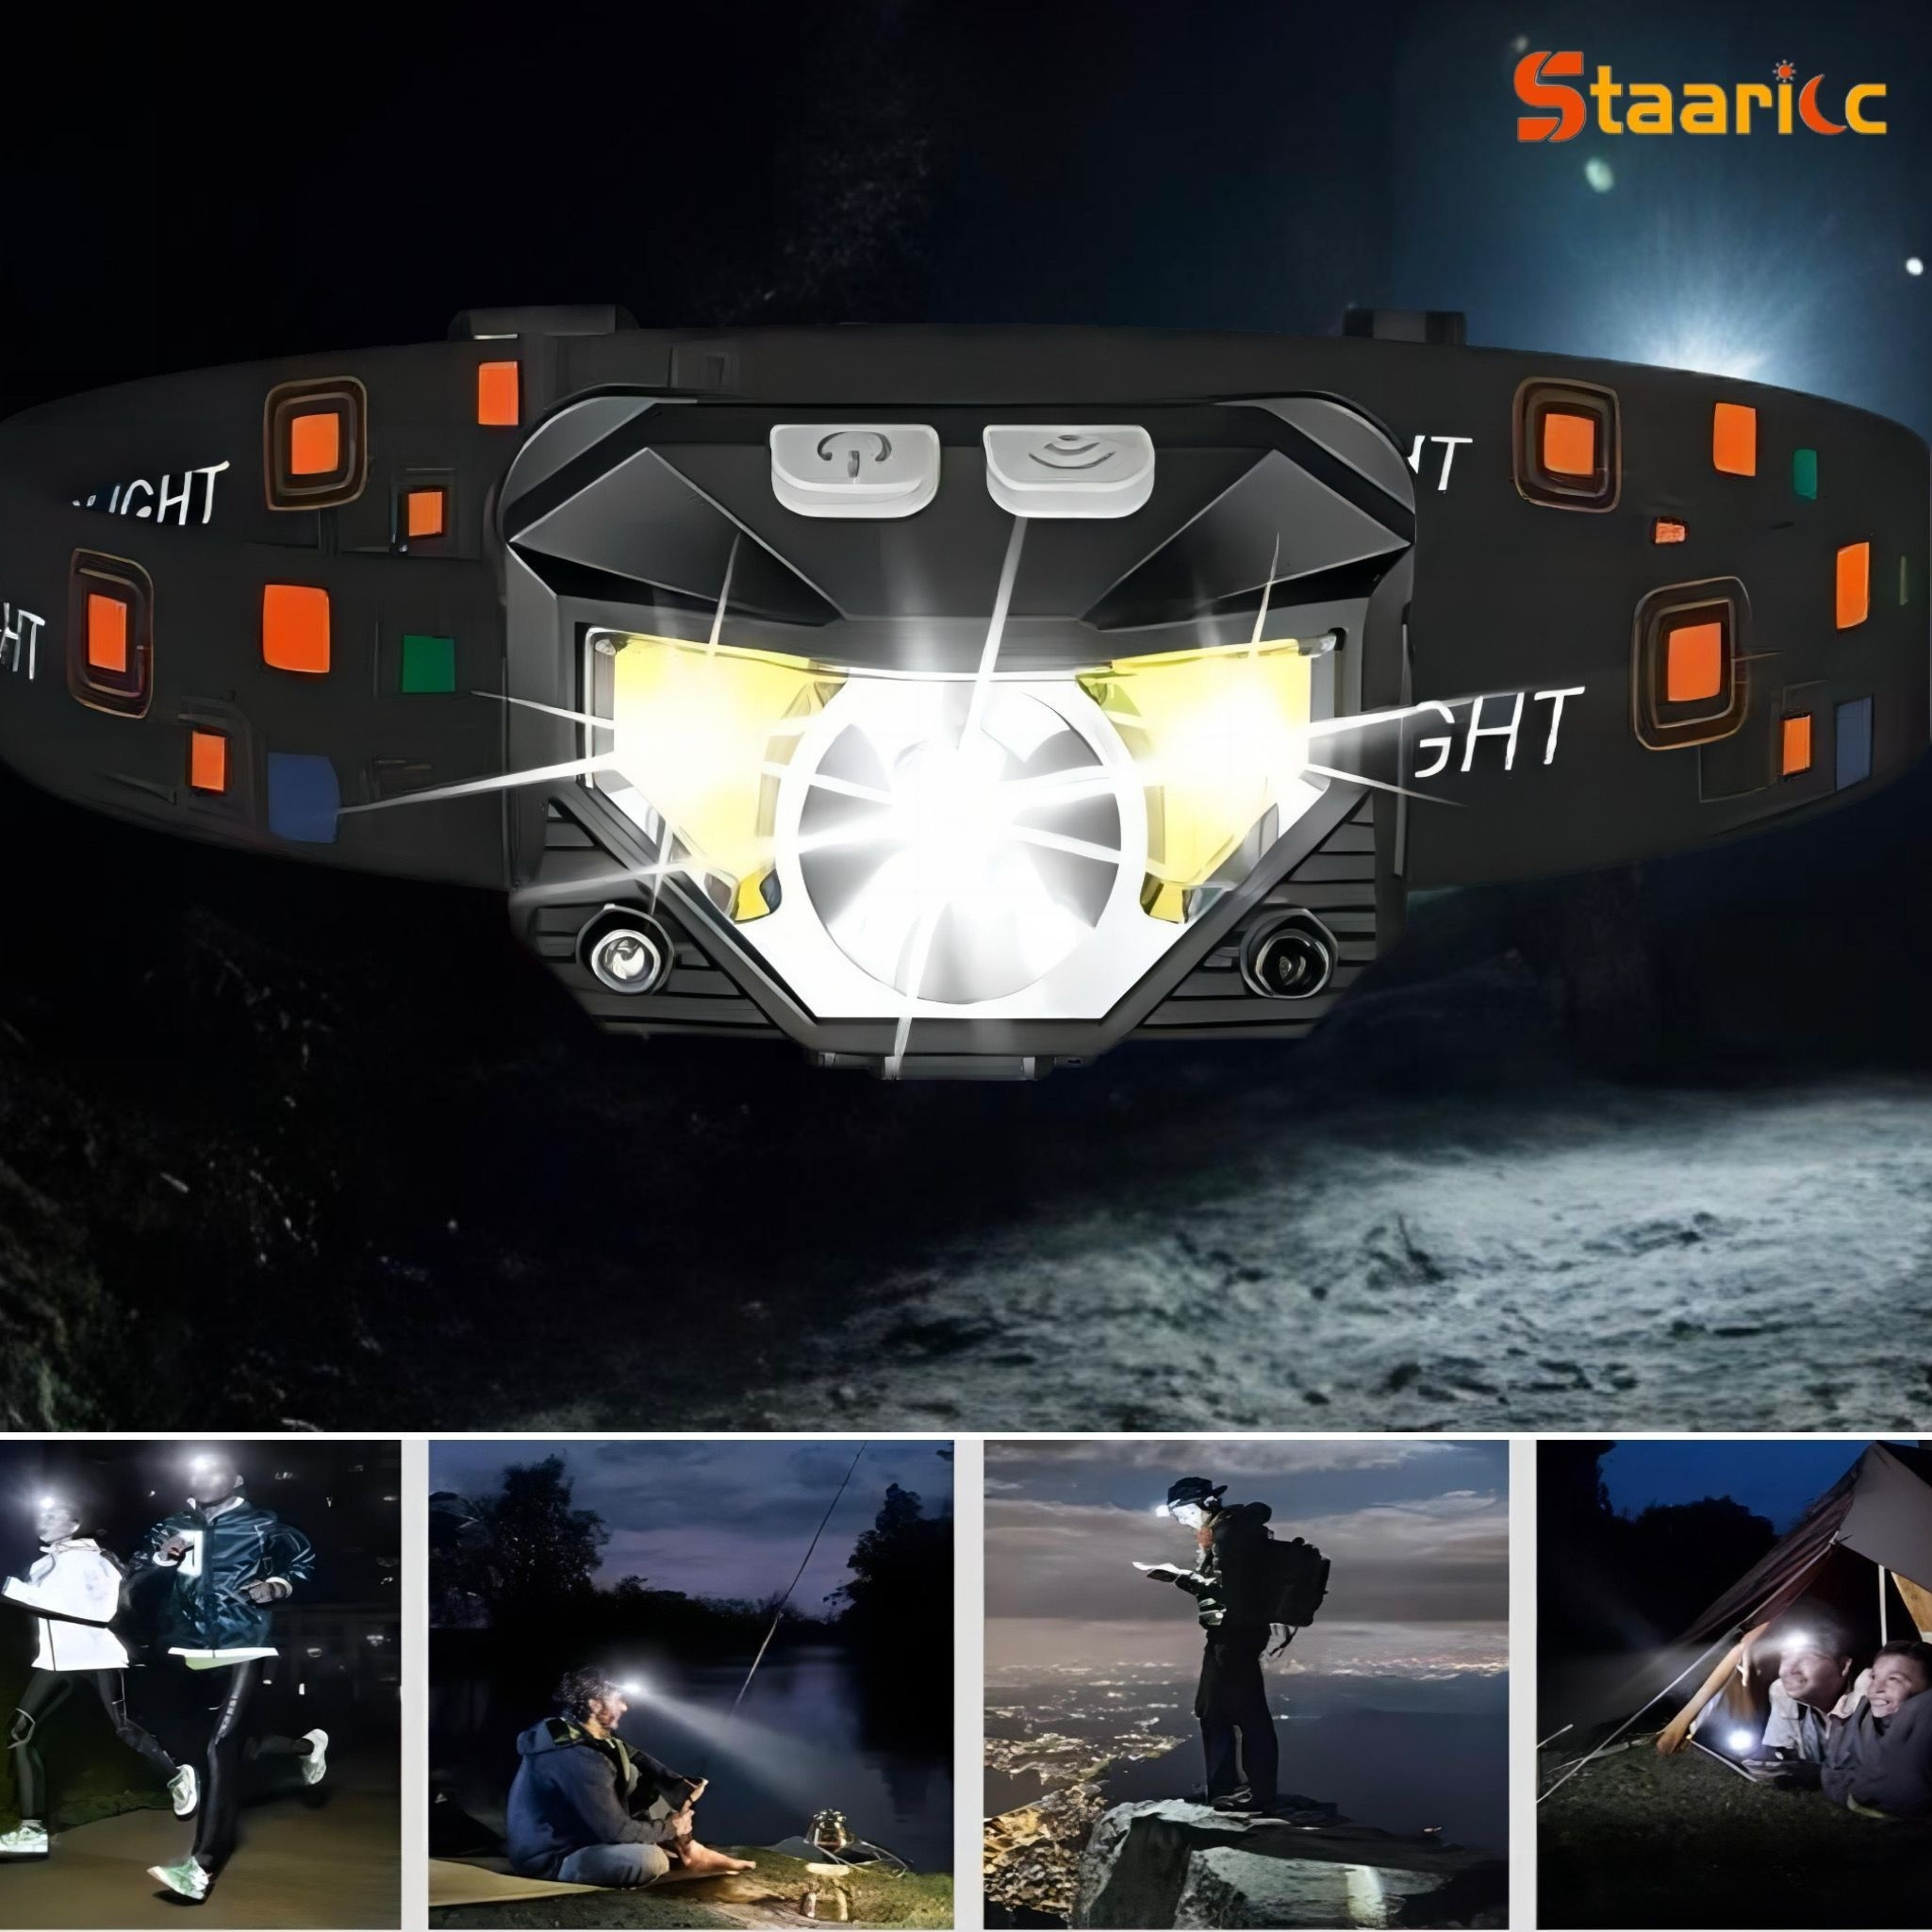 

Staaricc 1200 Lumens Ultra Bright Led Rechargeable Headlight With Motion Sensor, Headlight Flashlight, 8 Modes Suitable For Outdoor Camping, Running, Fishing, Emergency Response